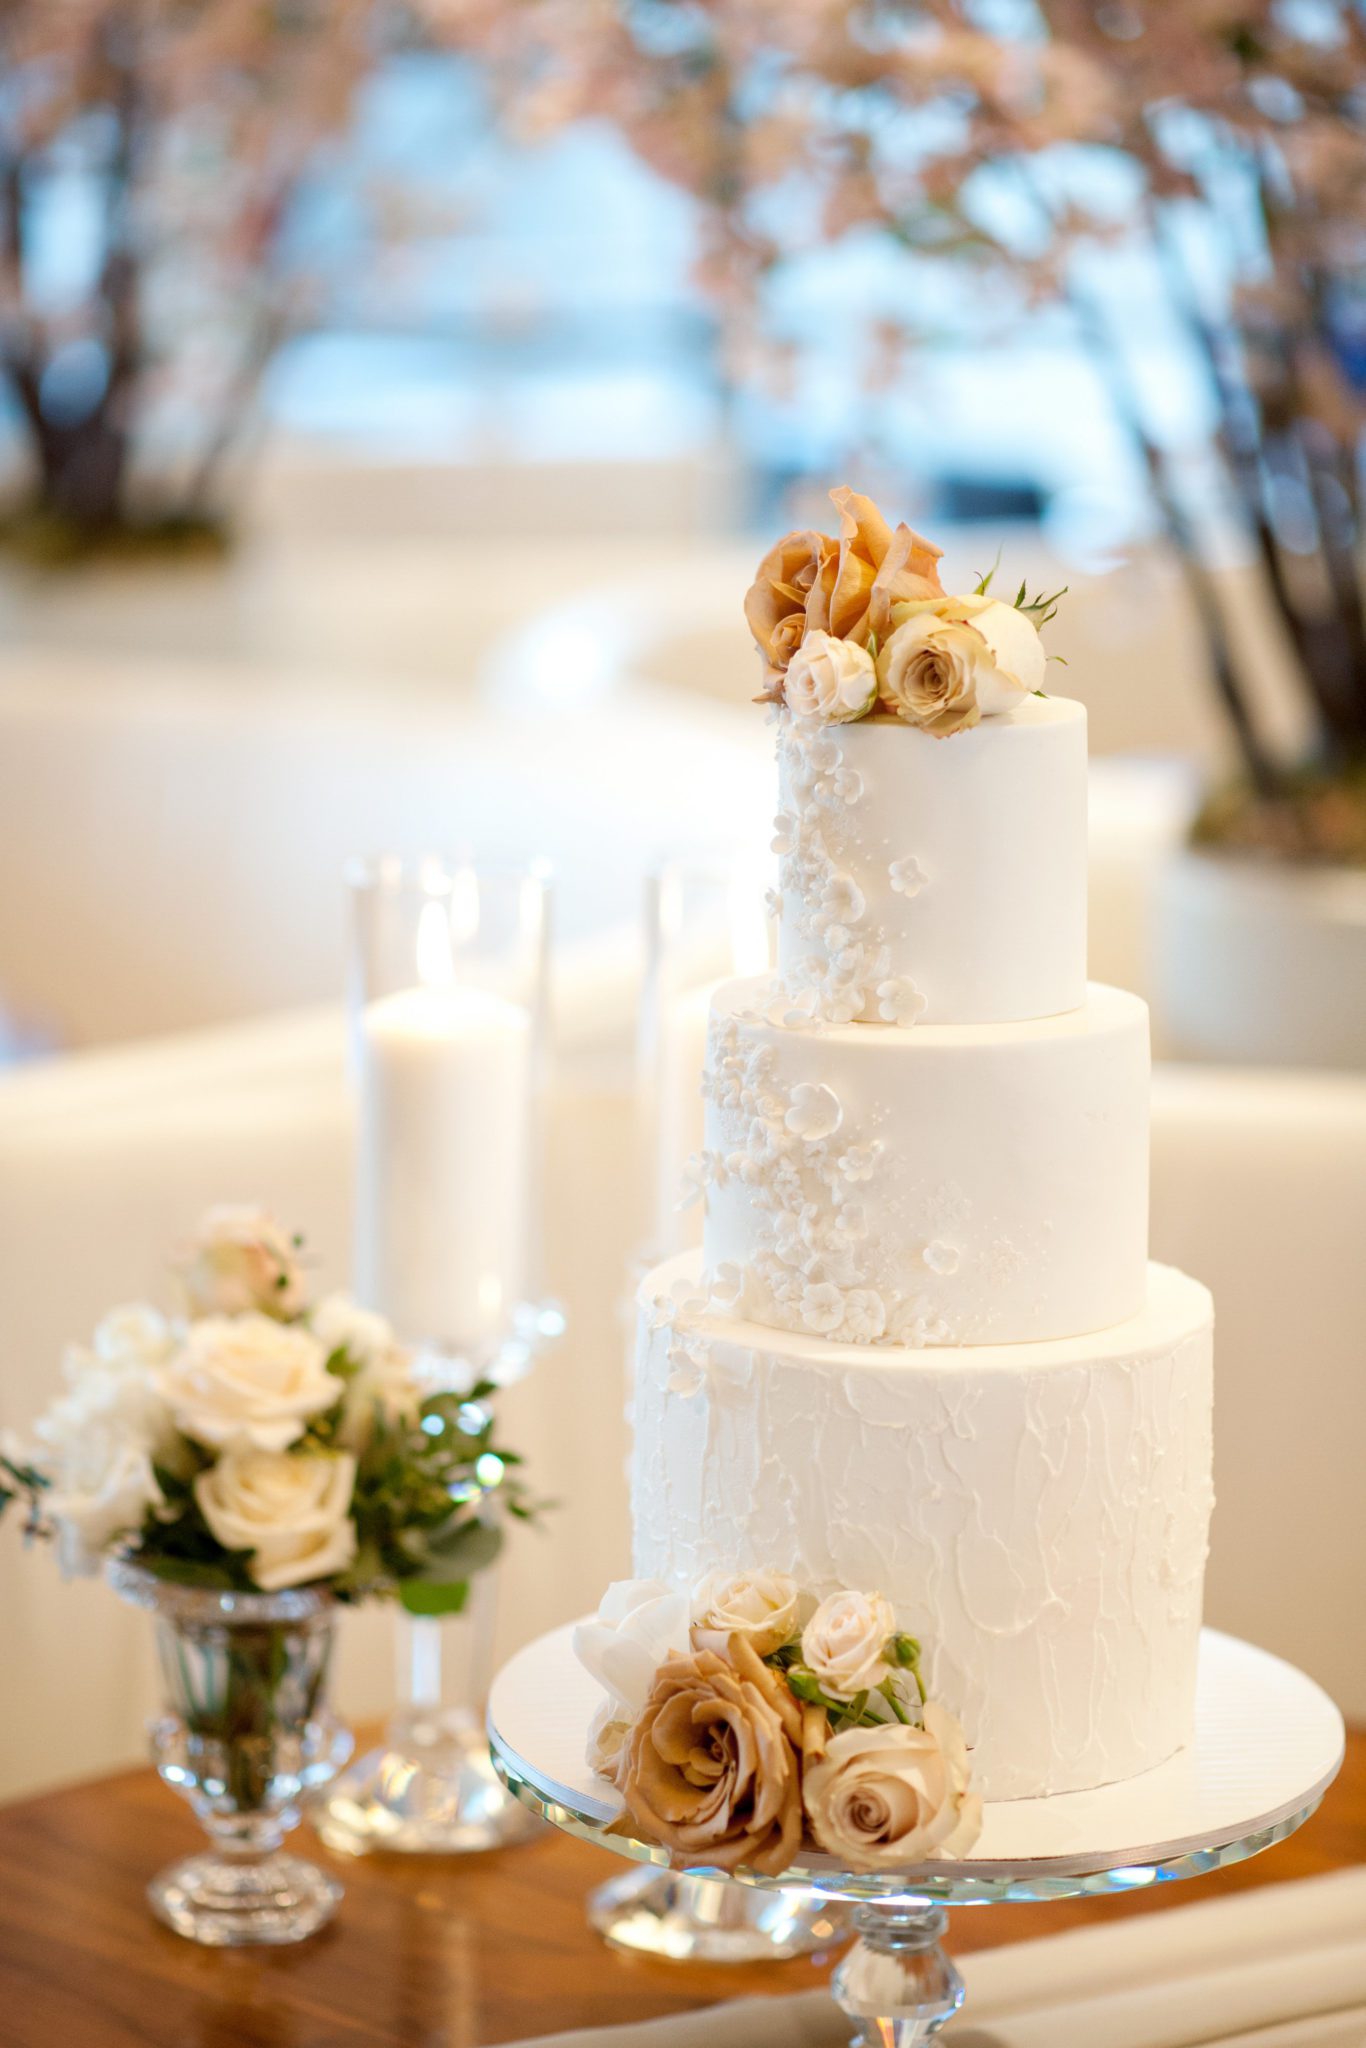 Classic and elegant white wedding cake with floral details